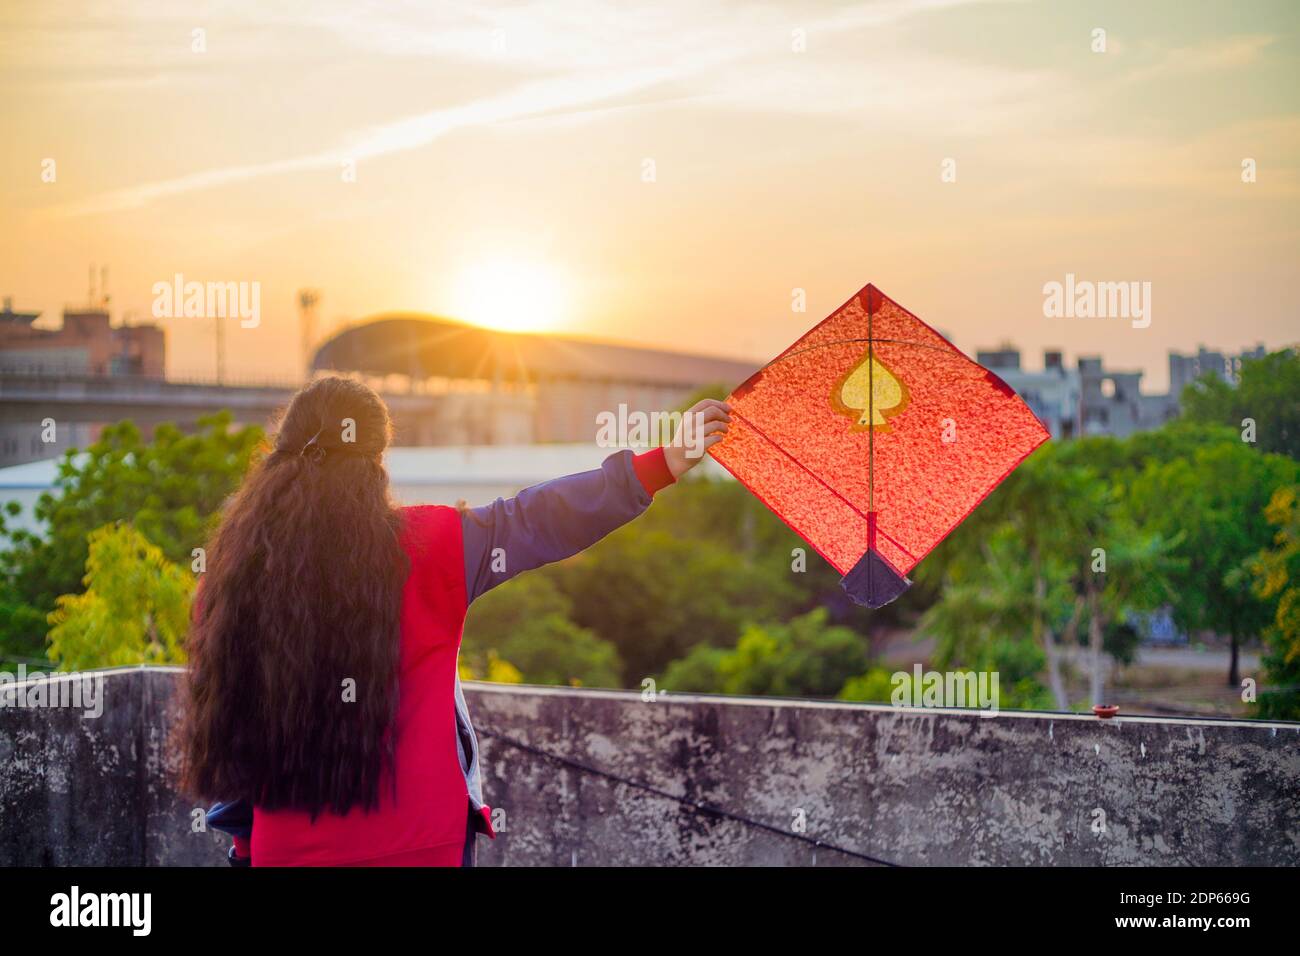 Young woman holding aloft colorful paper and wood kite against a blurred background  setting sun on the indian kite festival of makar sankranti or Stock Photo -  Alamy